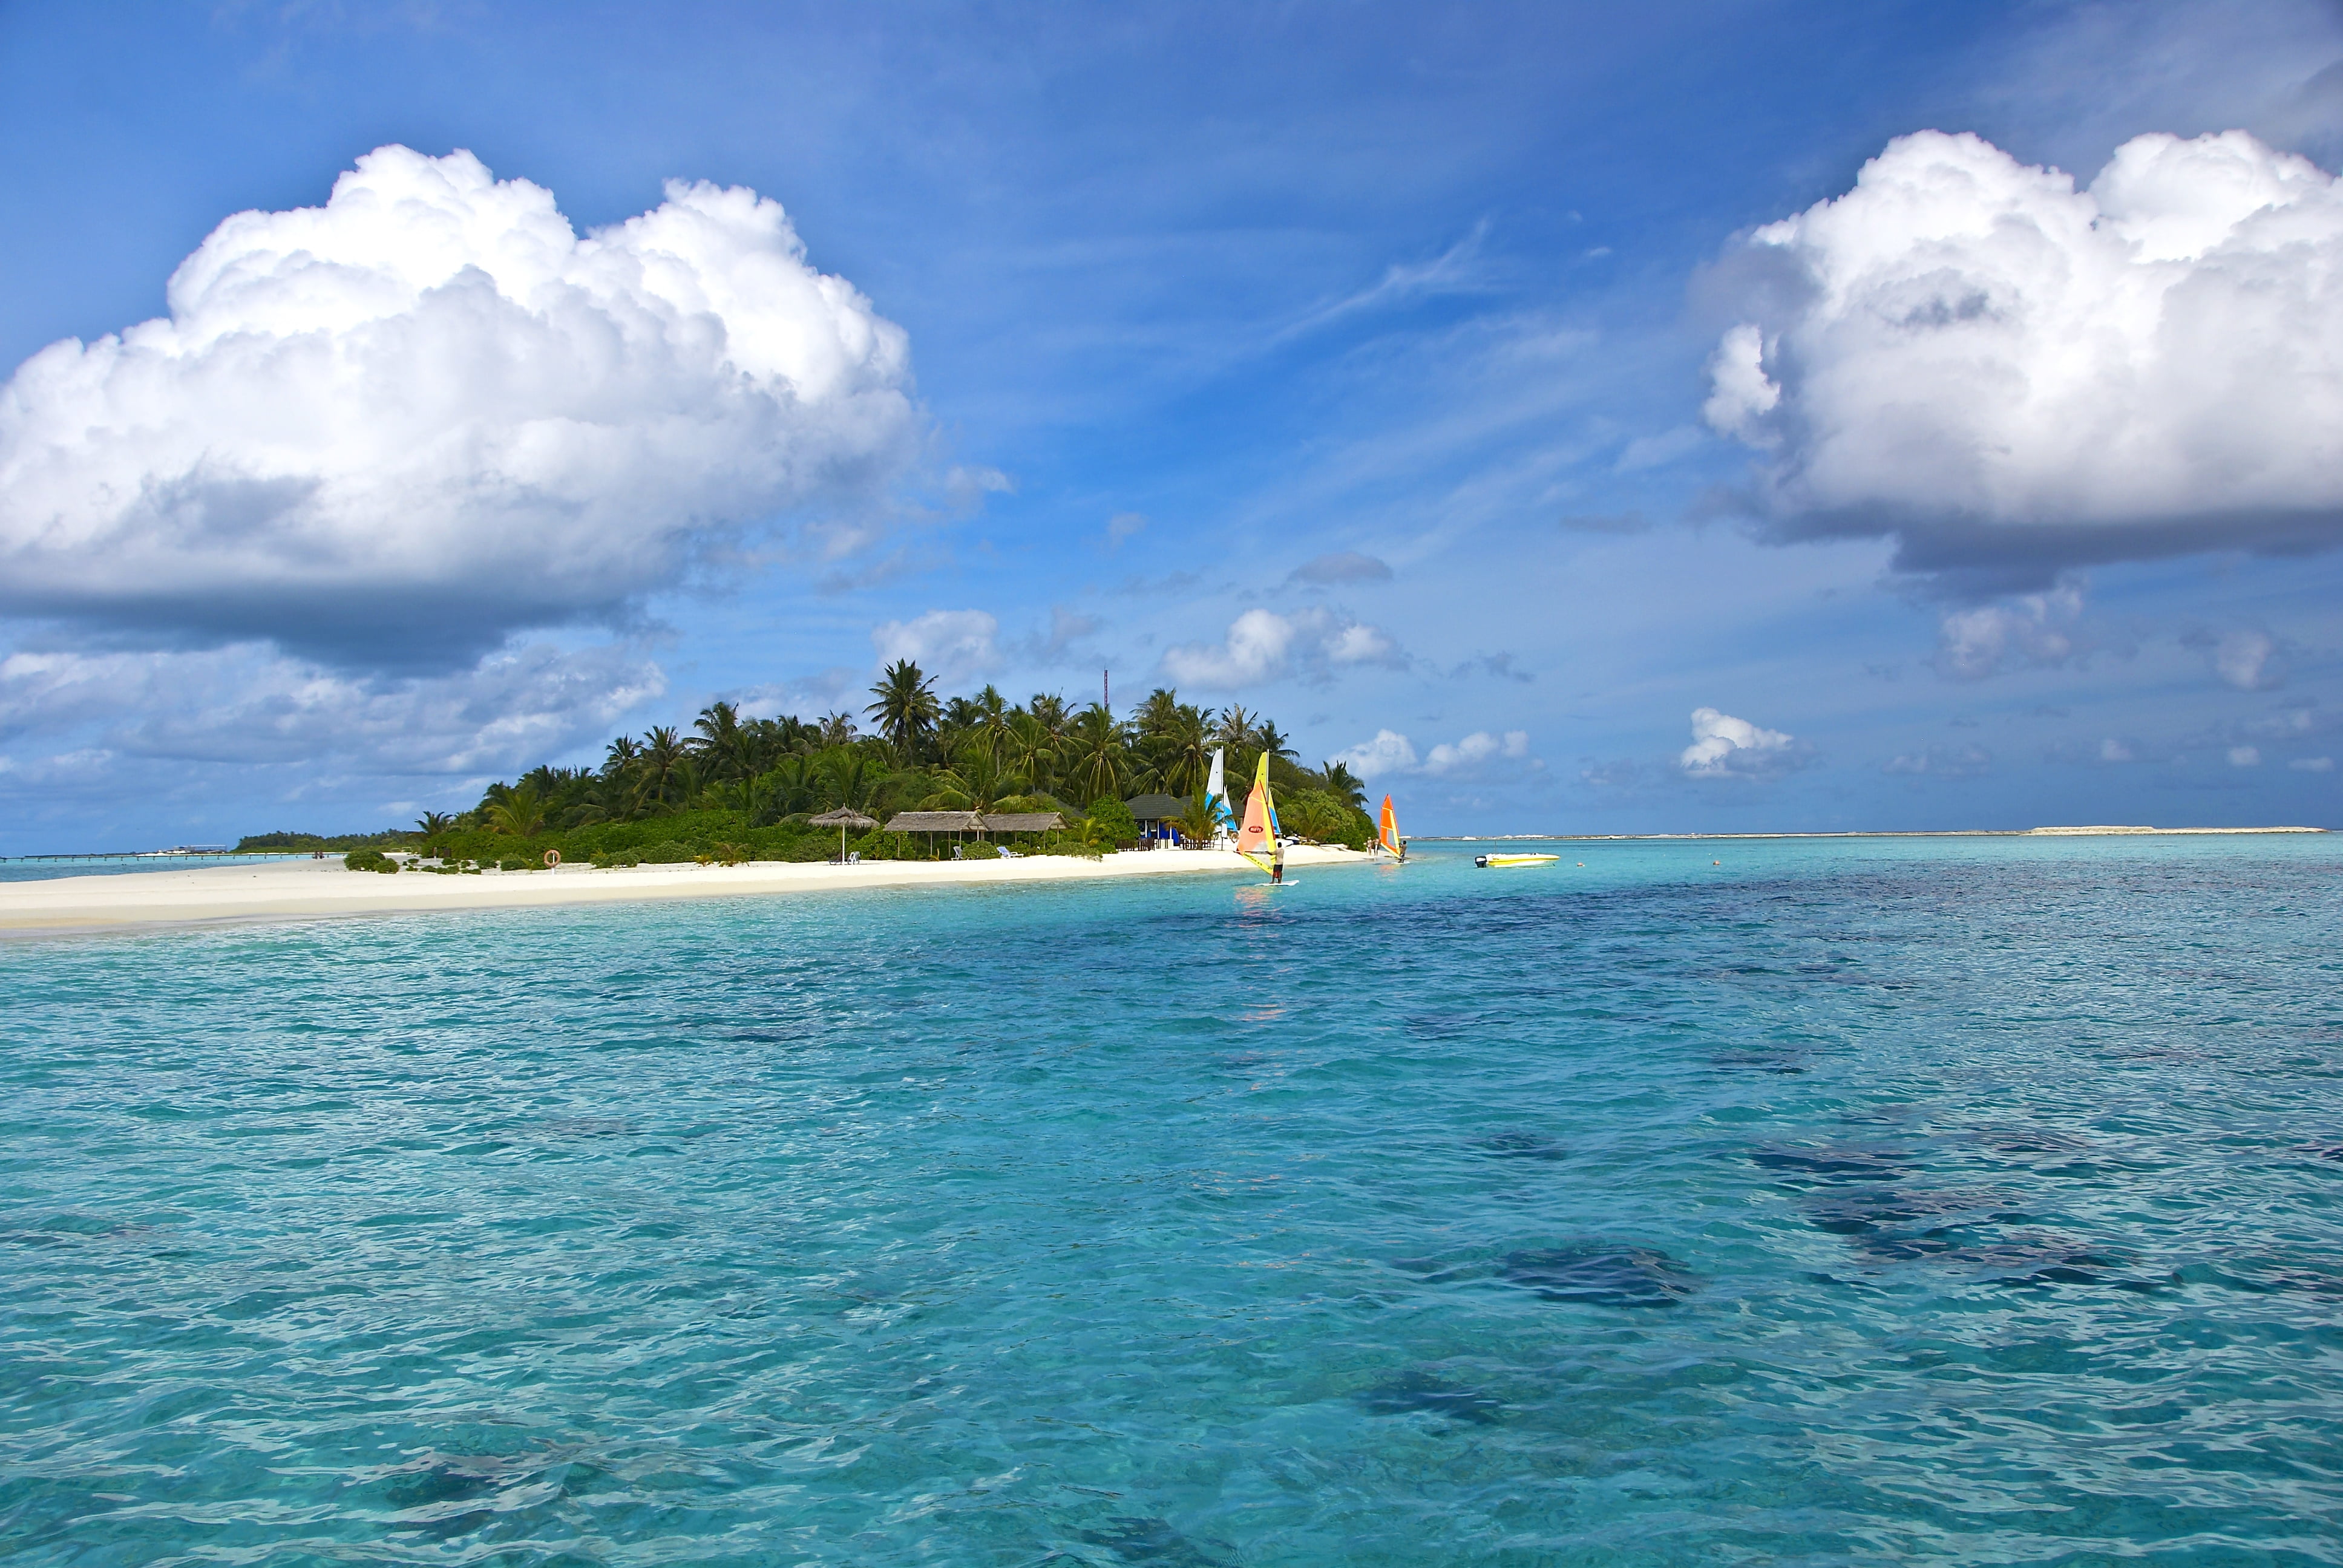 nimbus clouds, island and body of water, maldives, beach, tropical